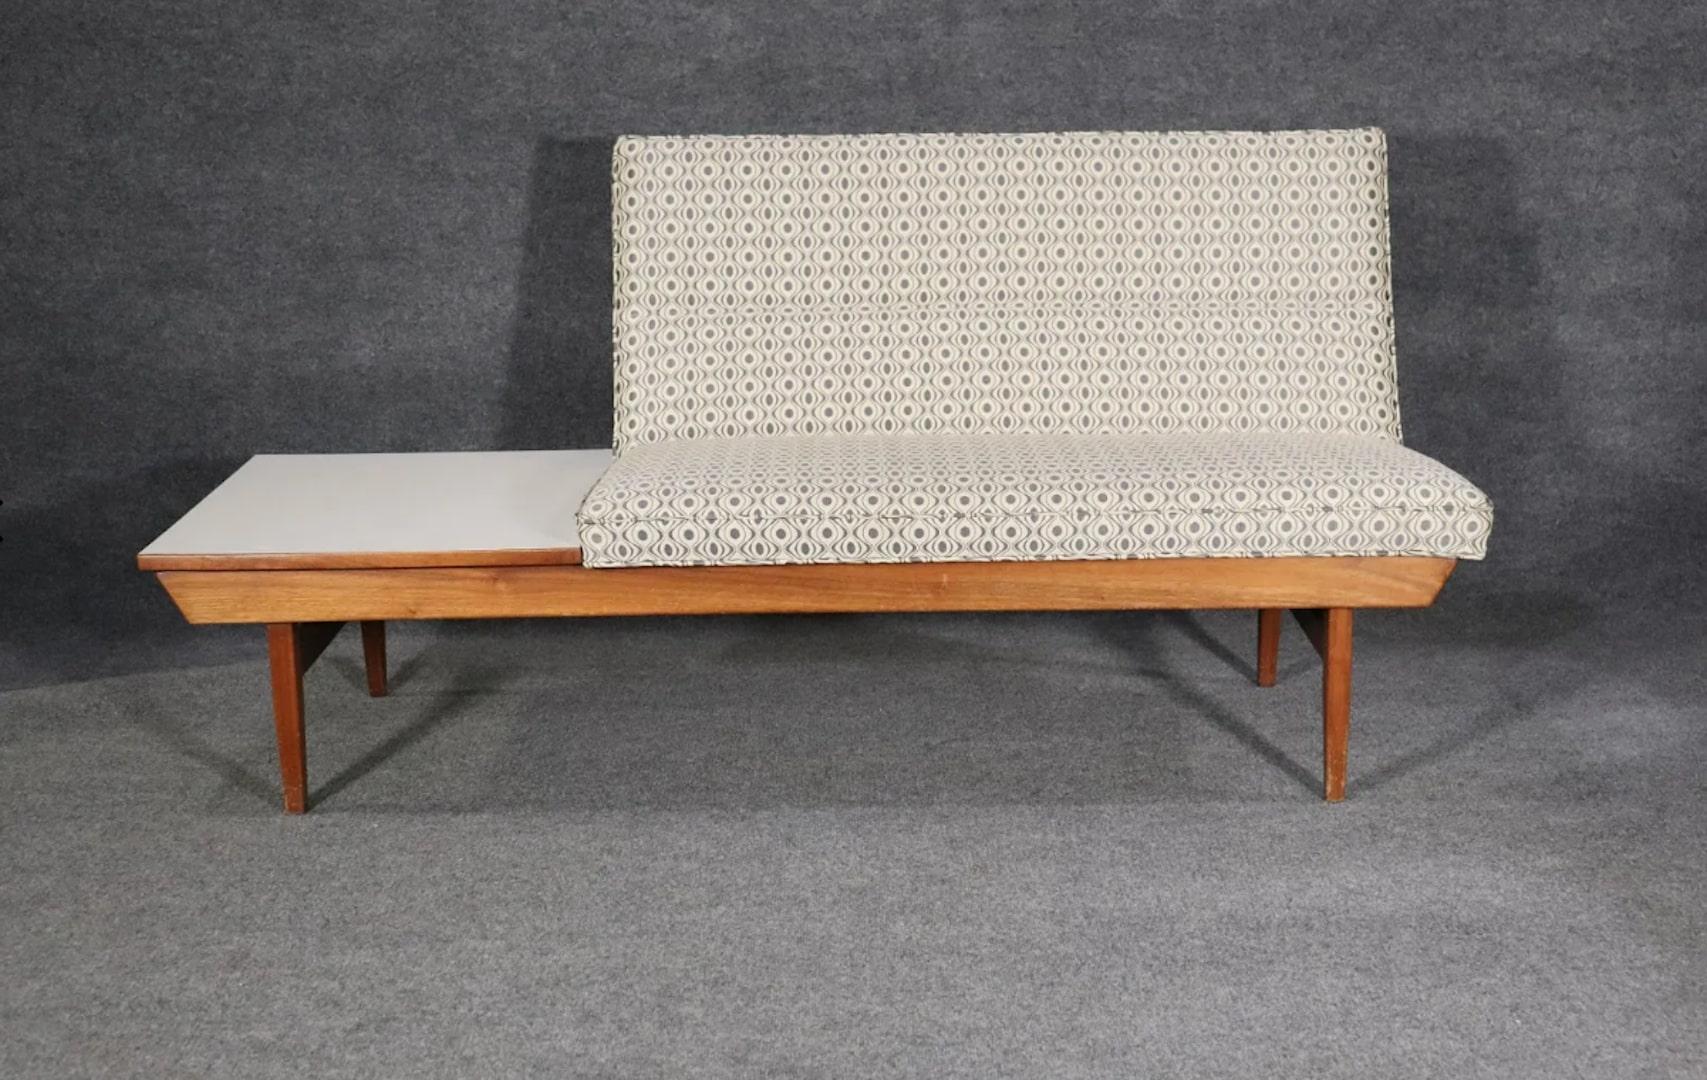 Mid-Century Modern bench with attached table. Made by Thayer Coggin with upholstered settee on a wood bench.
Please confirm location.